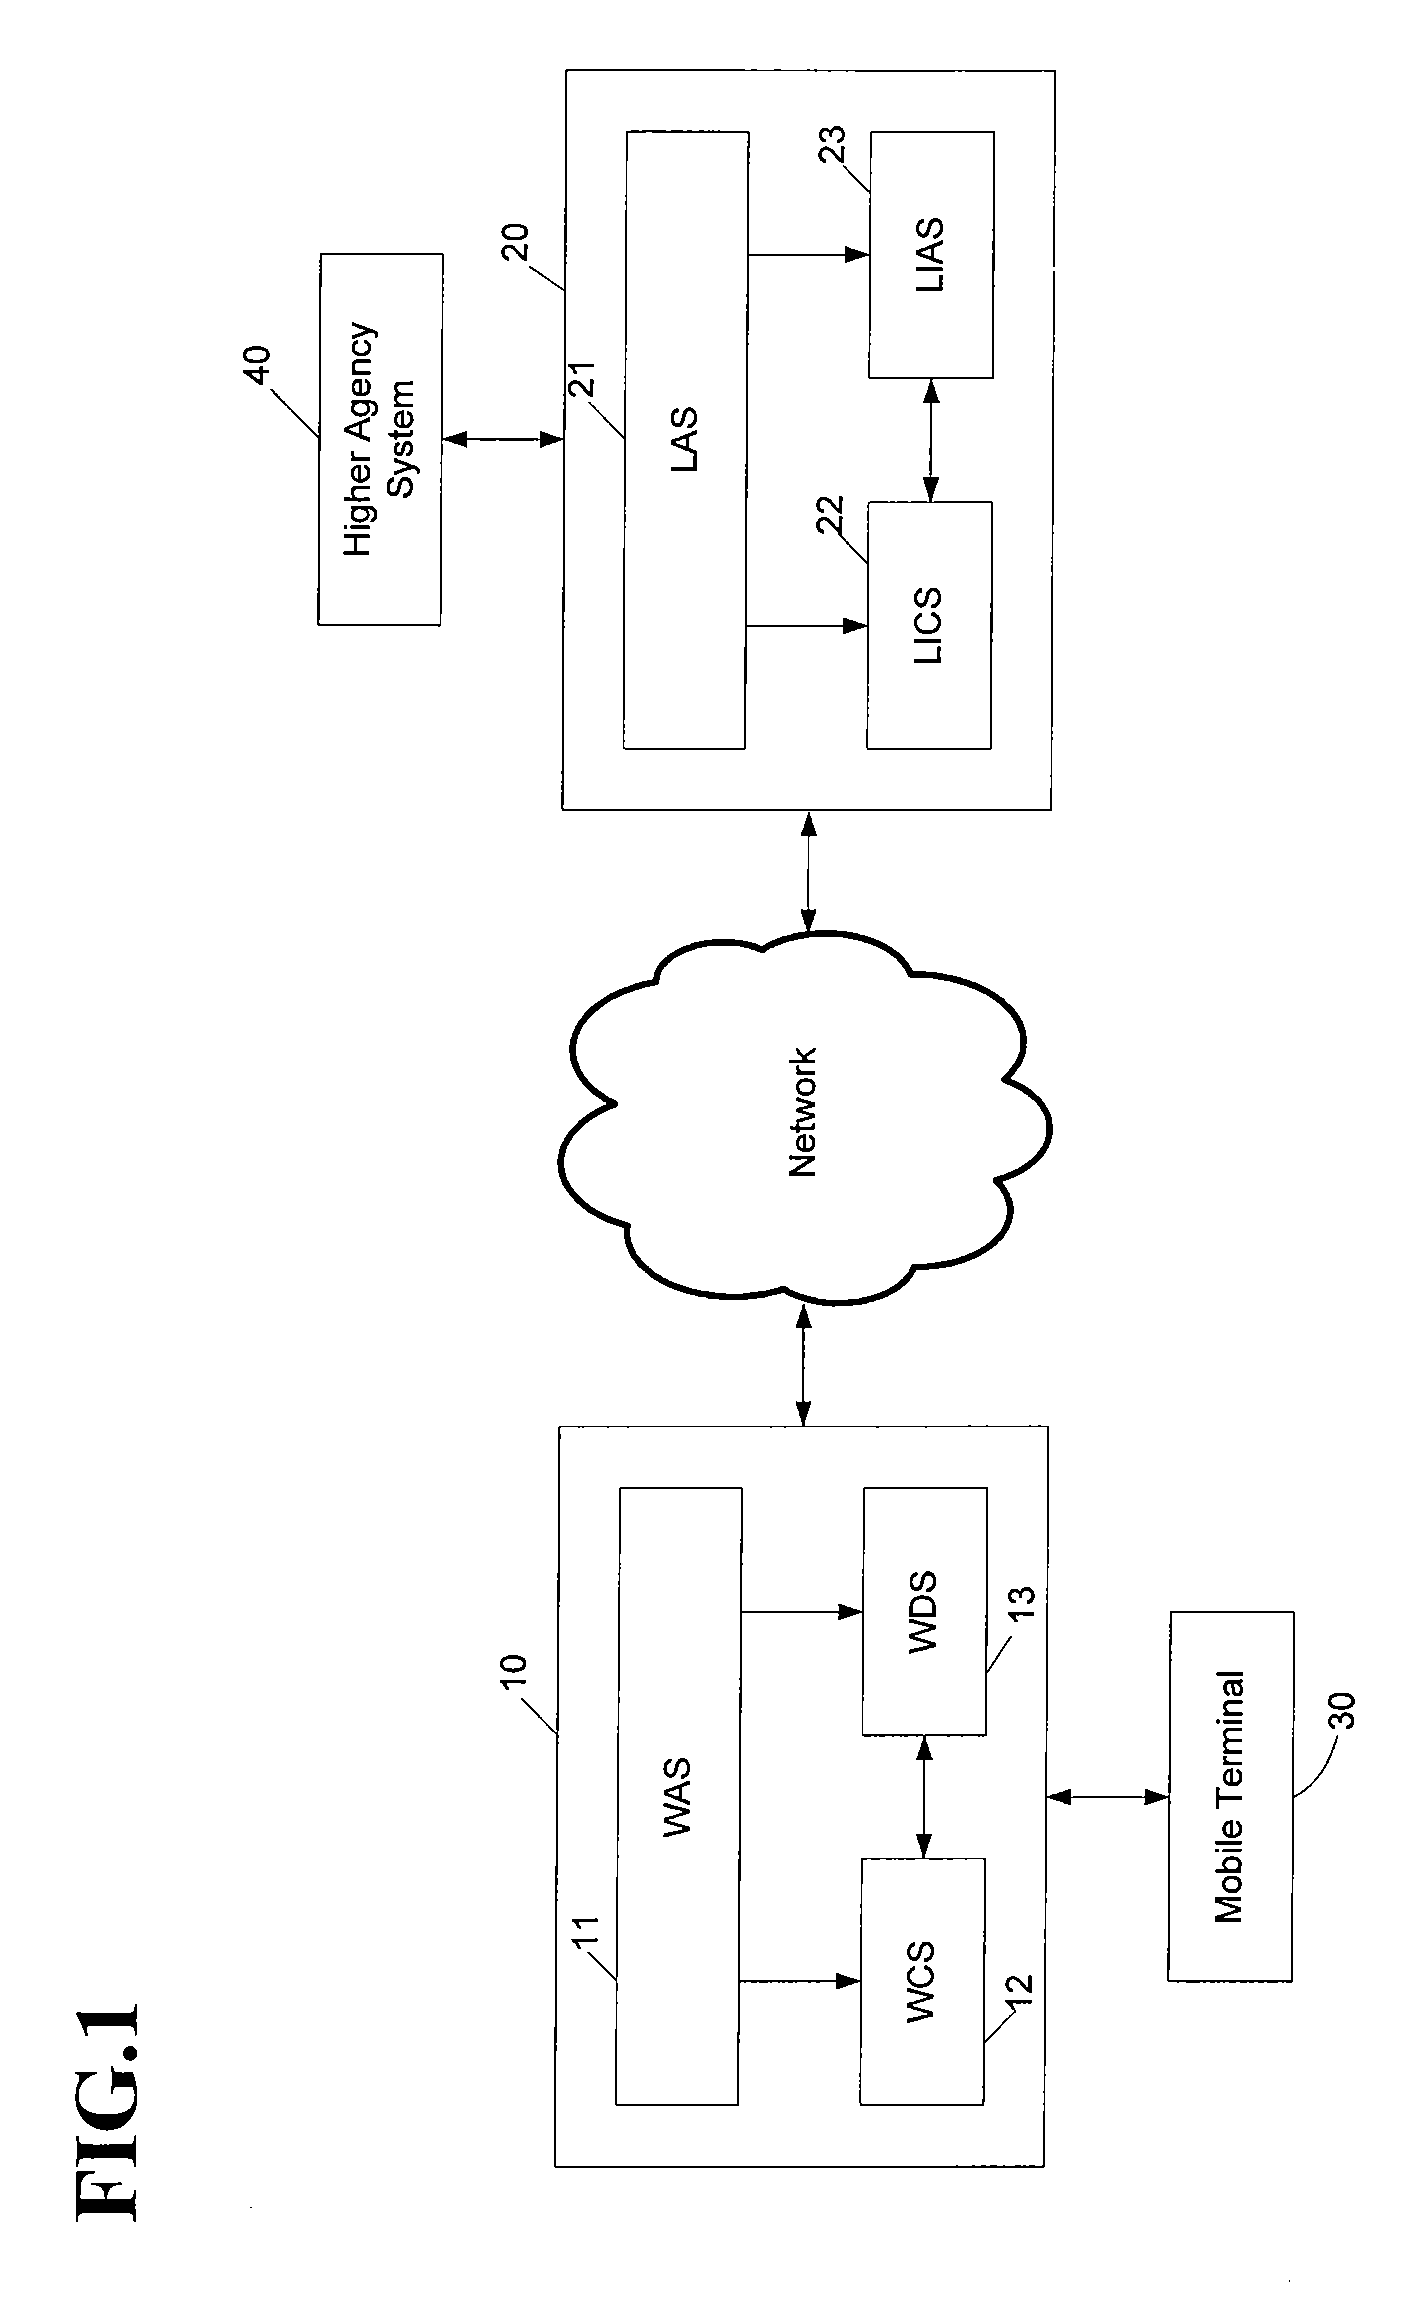 Electronic surveillance method and system